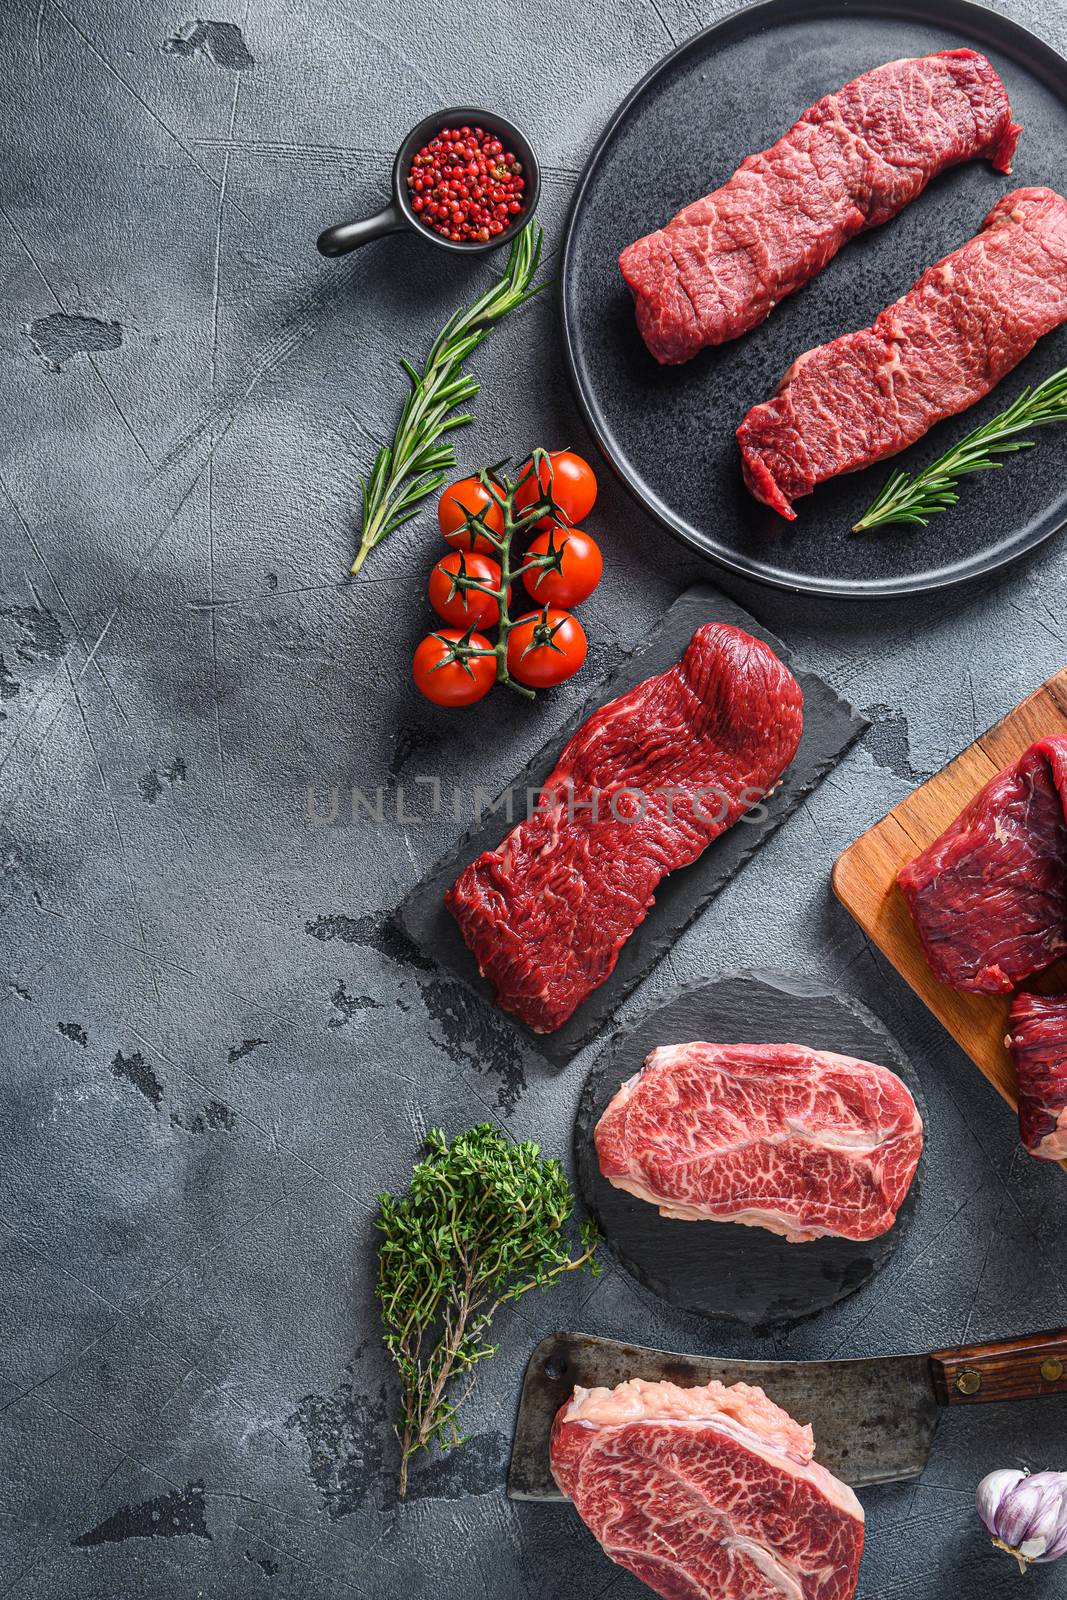 Organic denver, top blade, tri tip steak on a black plate and stone slate with seasonings, herbs grey concrete background. Top view vertical concept space for text by Ilianesolenyi